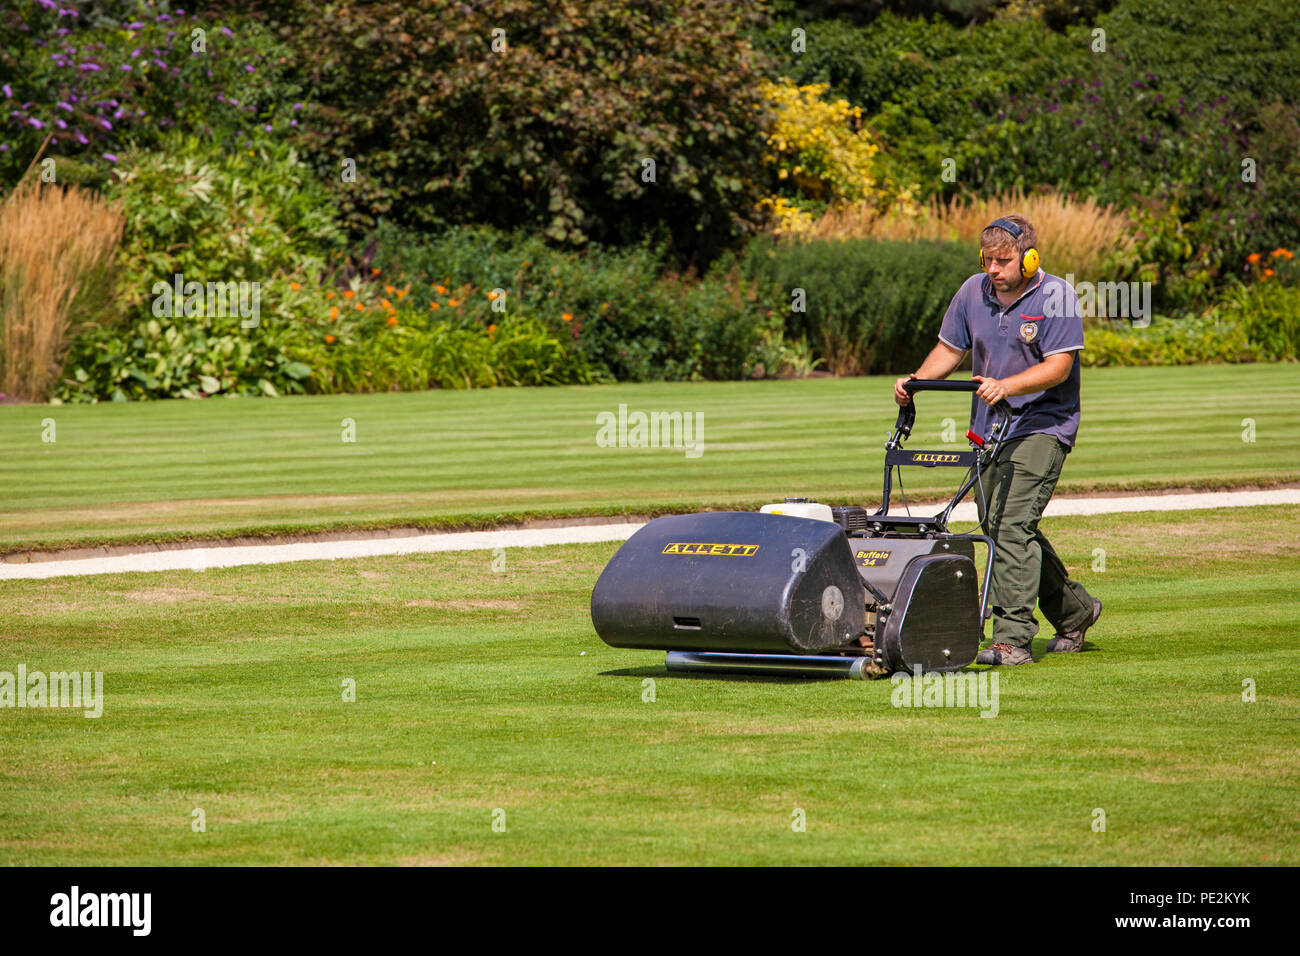 Gardener groundsman cutting mowing the grass lawns at Trinity collage Oxford using a traditional Allett Buffalo 34' cylinder lawn mower Stock Photo